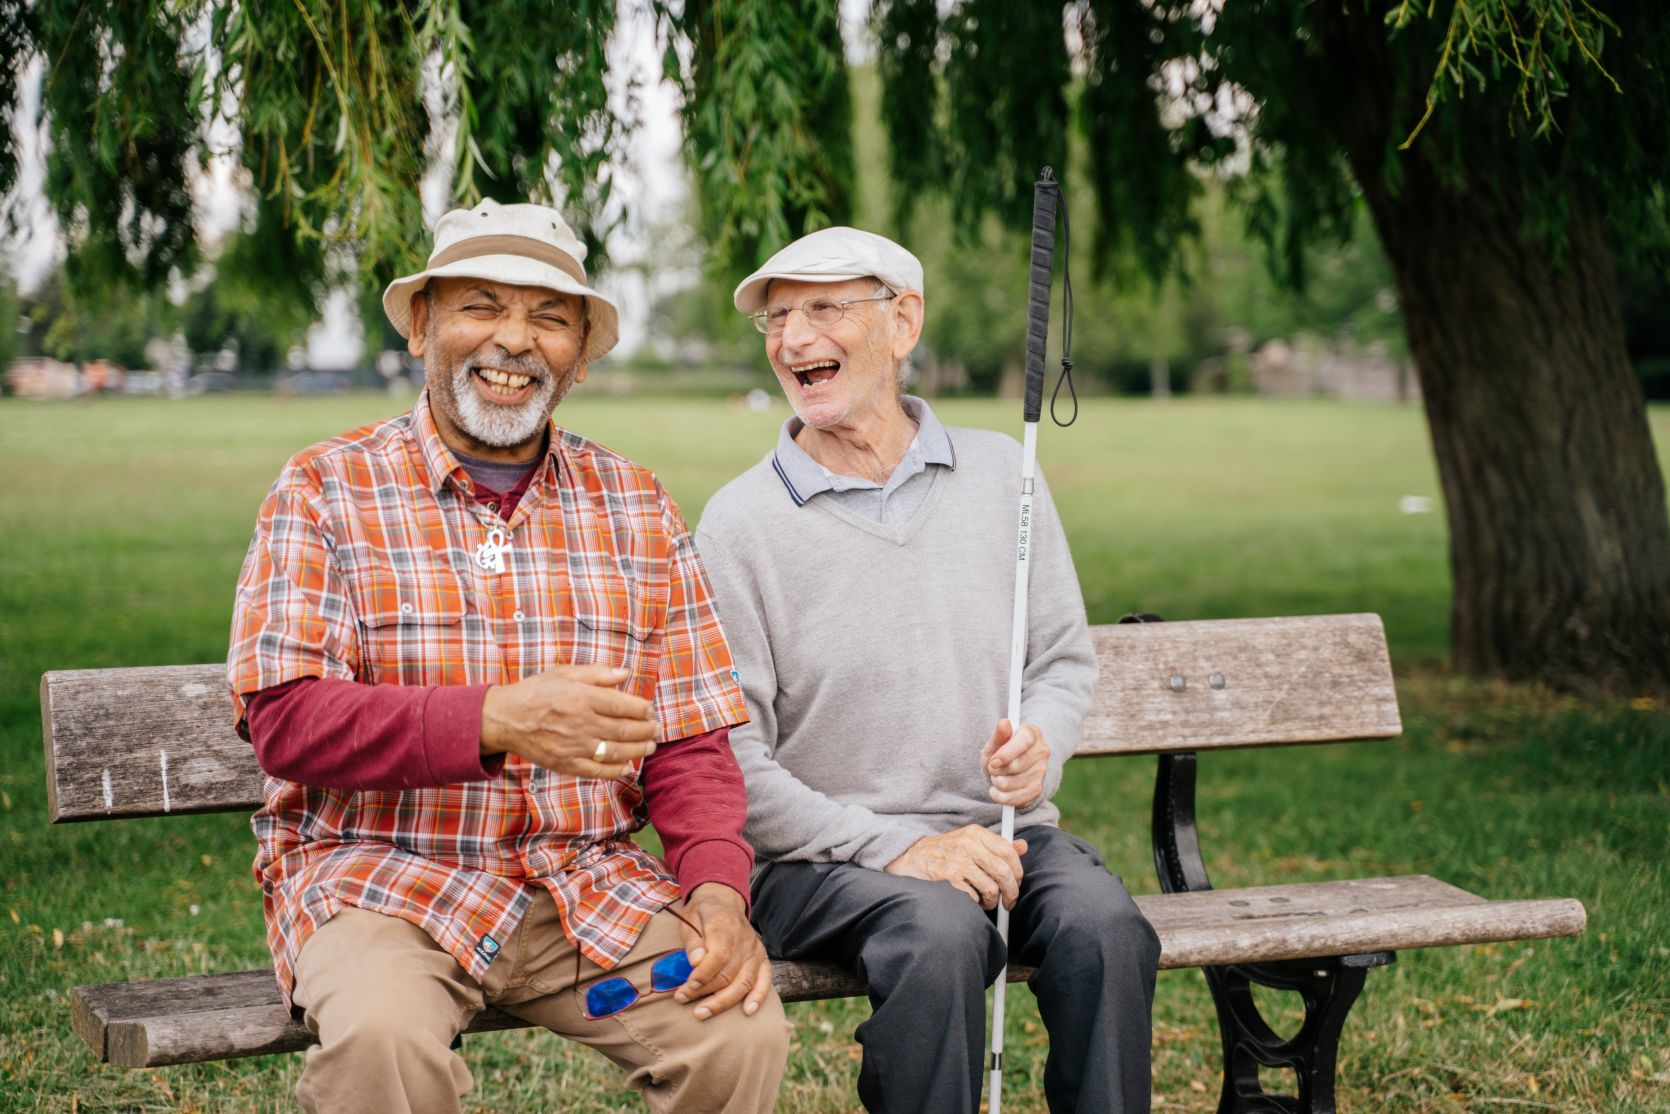 Two people laughing as they sit together on a park bench. They are both wearing hats while one has a pair of glasses and the other is carrying a white stick. Trees and a patch of grass can be seen behind them.